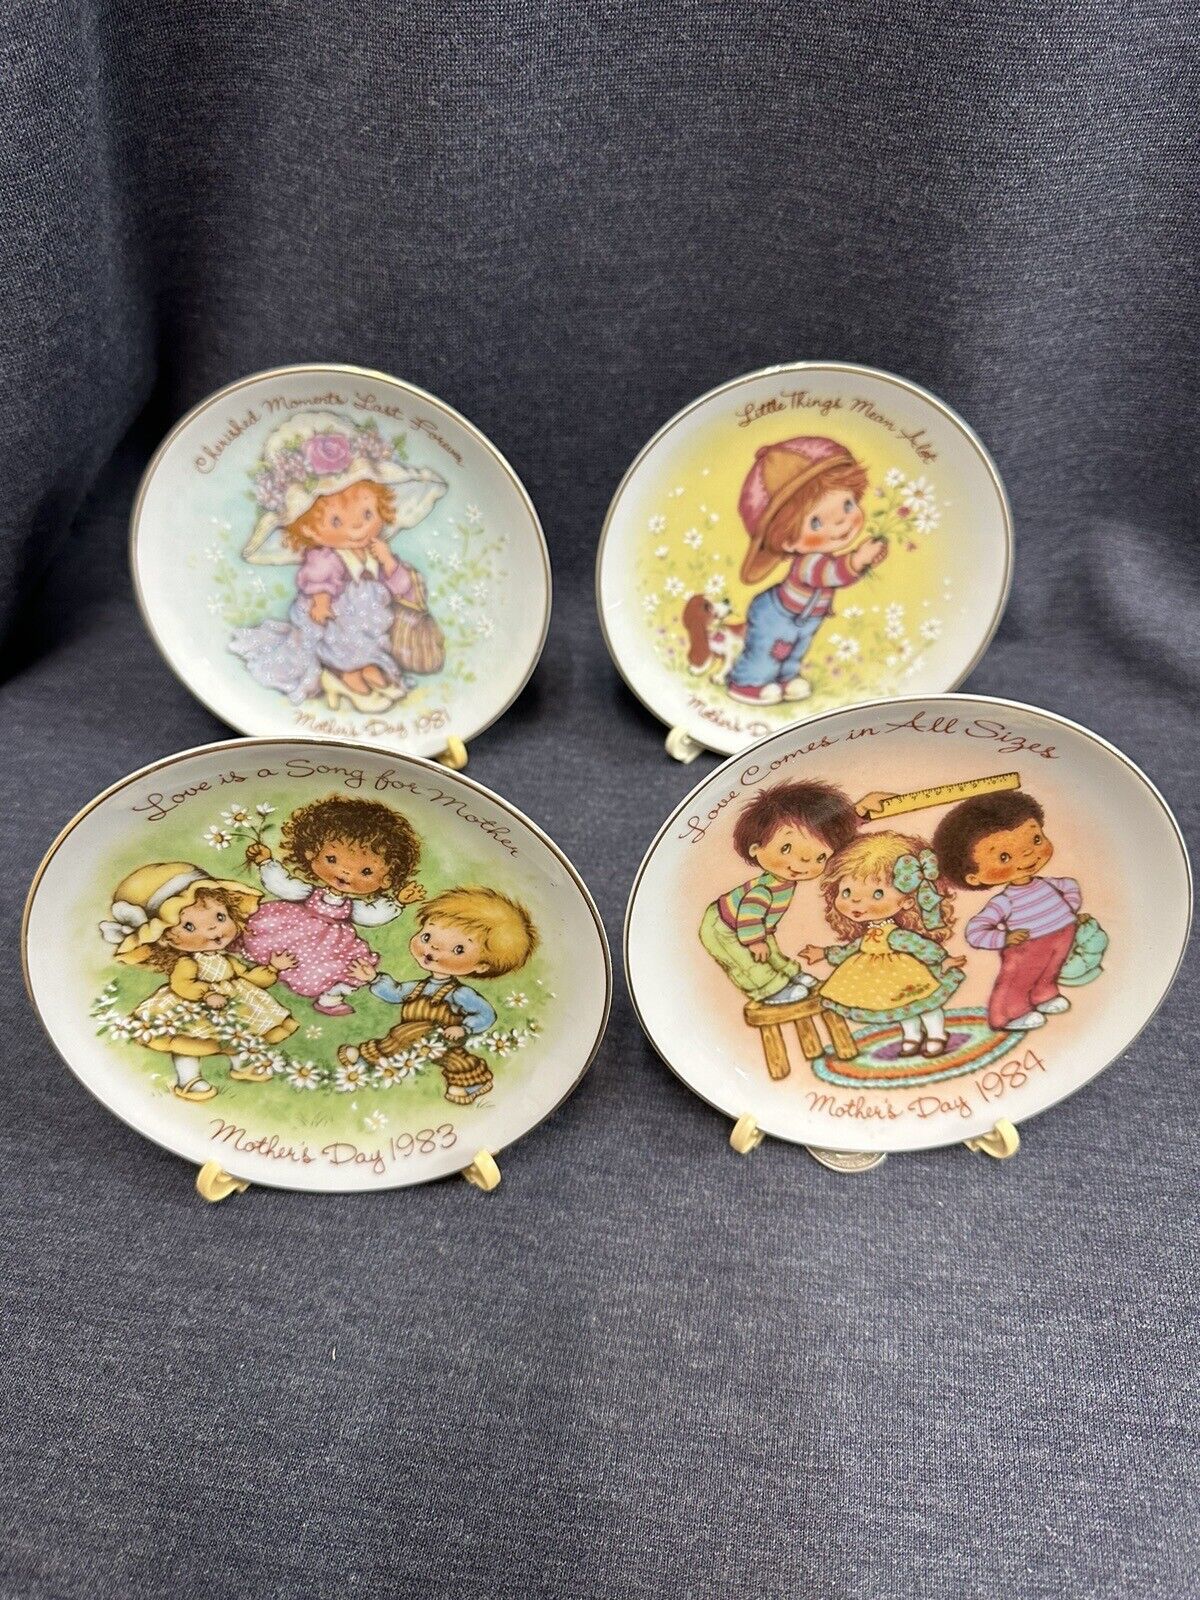 Avon Mother's Day 5 Inch Plates Lot Of 4 - 1981 - 1984 - $8.86